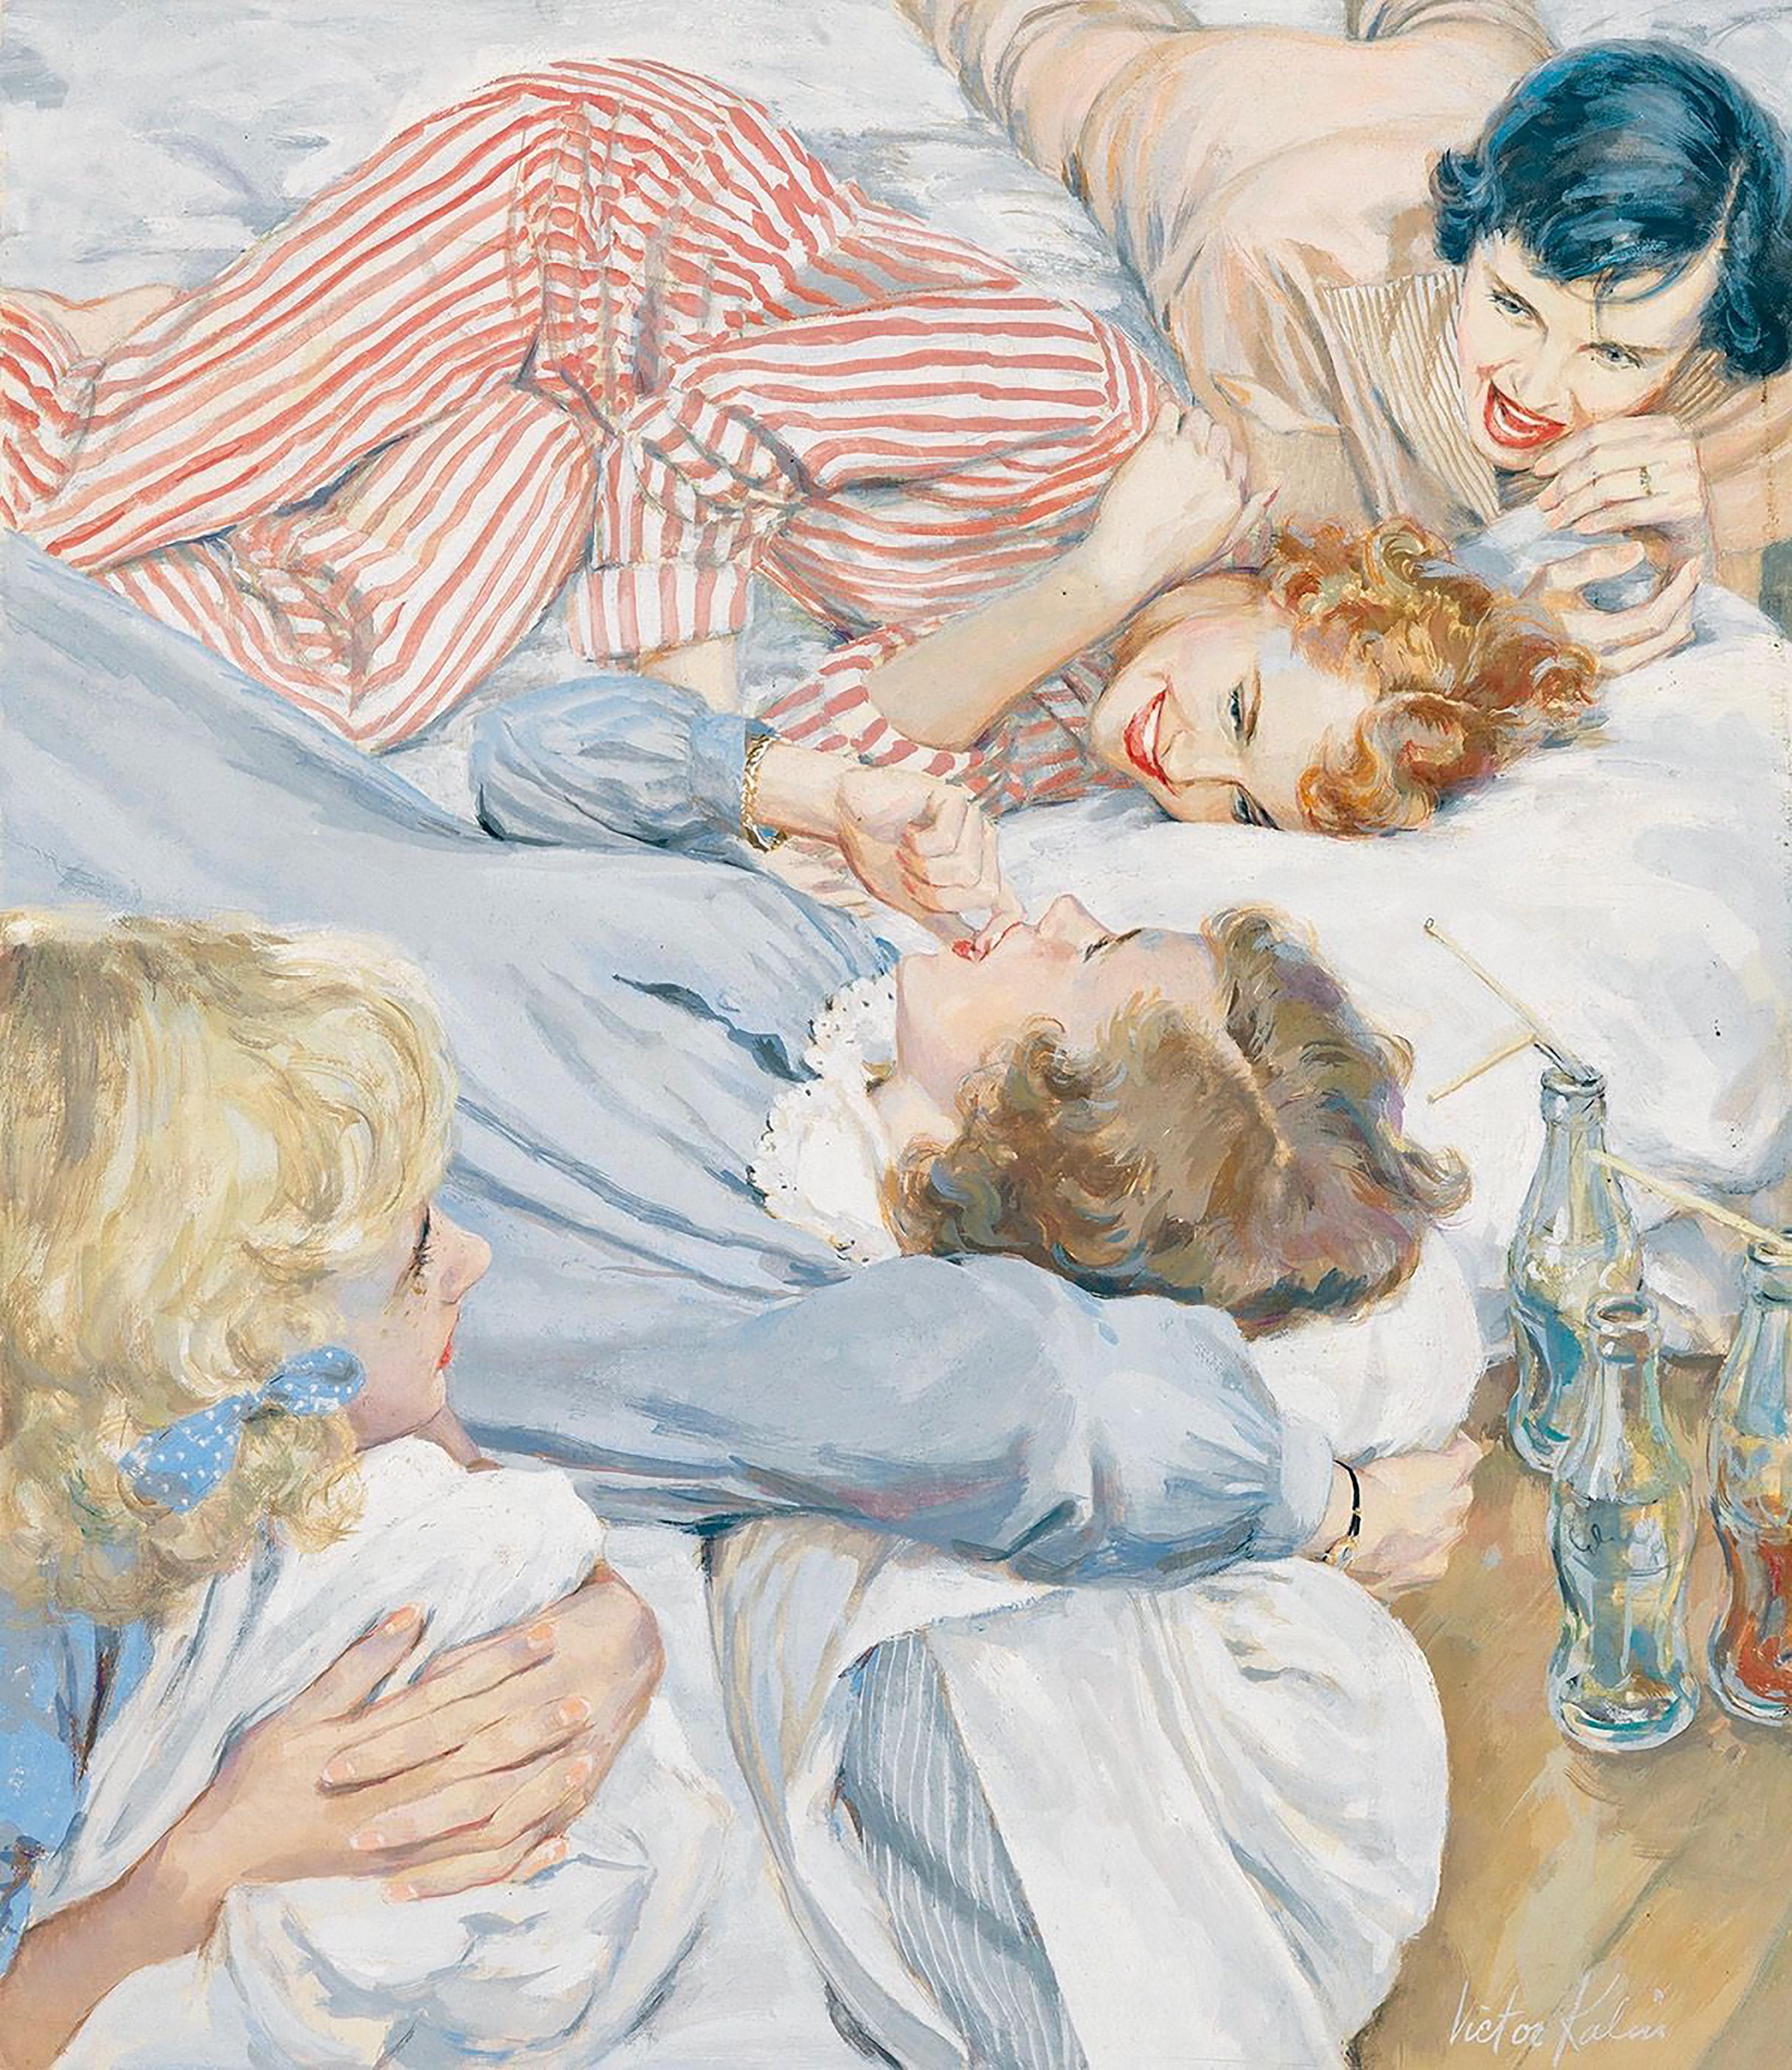 Victor Kalin - Pyjama Party For Sale at 1stDibs